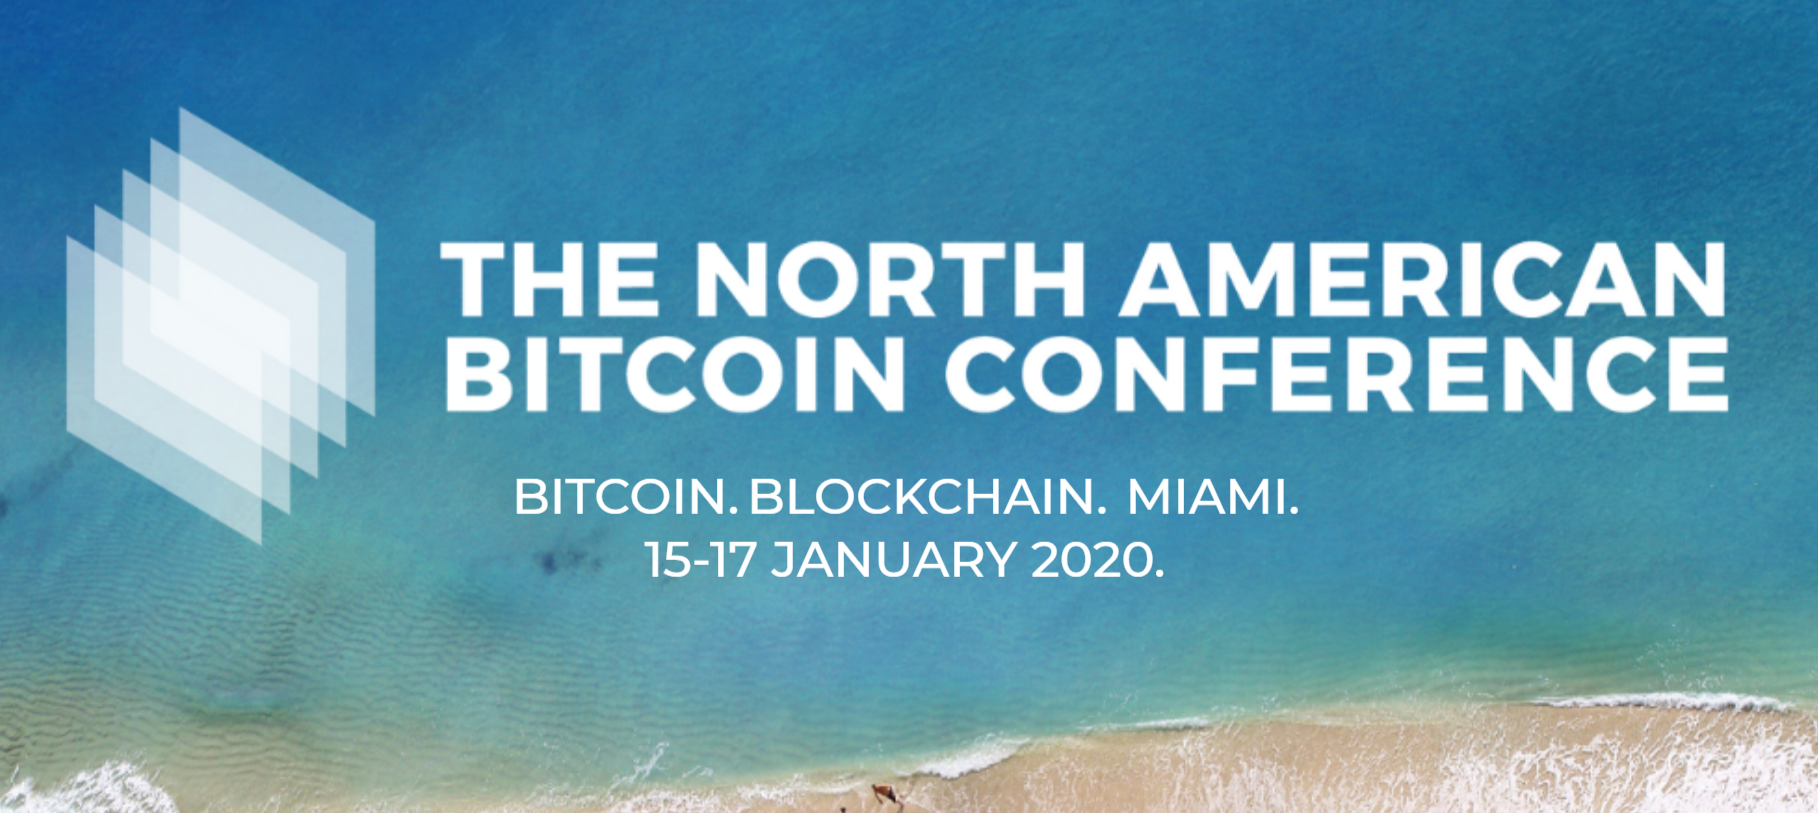 The North American Bitcoin Conference Returns